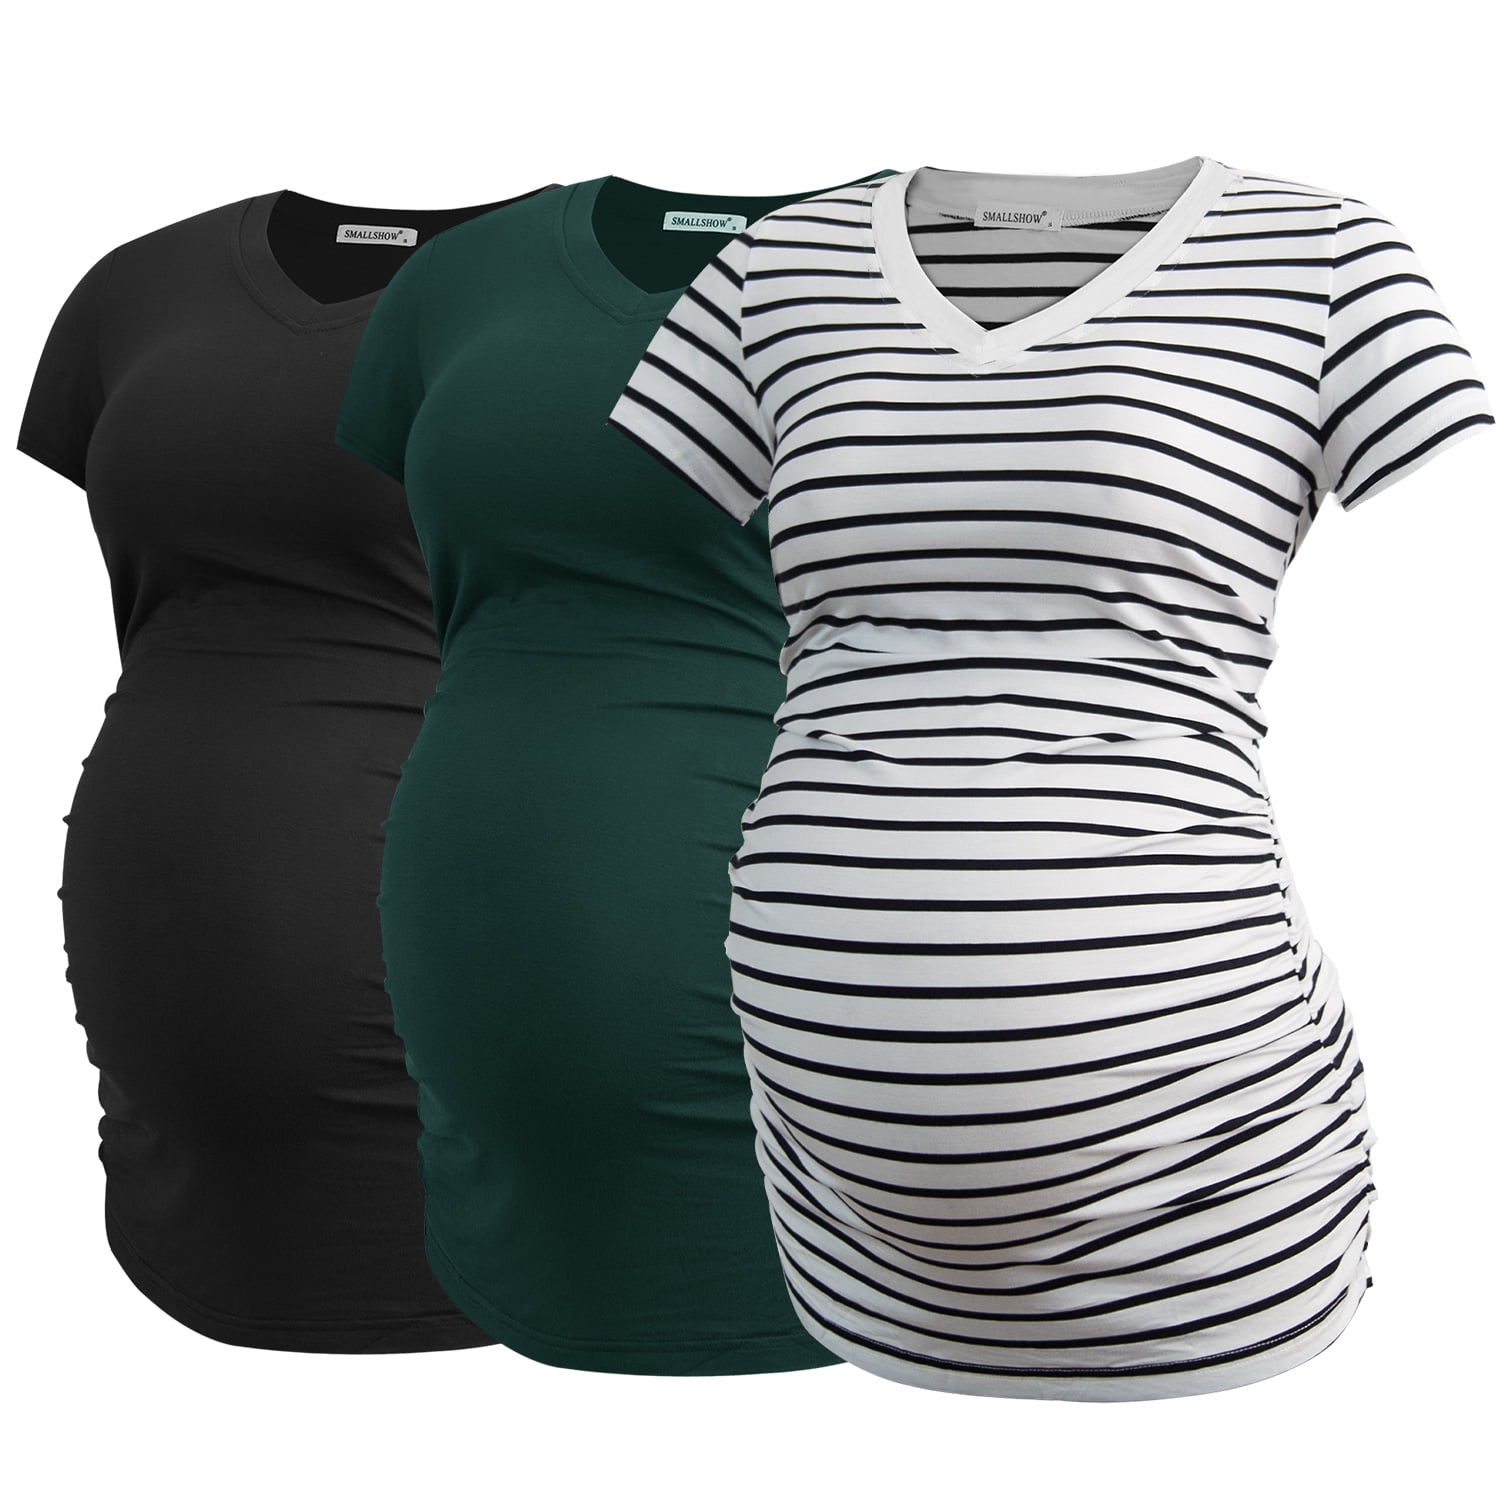 Smallshow Womens Maternity Tops Tunic T Shirts Long Sleeve Pregnancy Clothes 3-Pack 